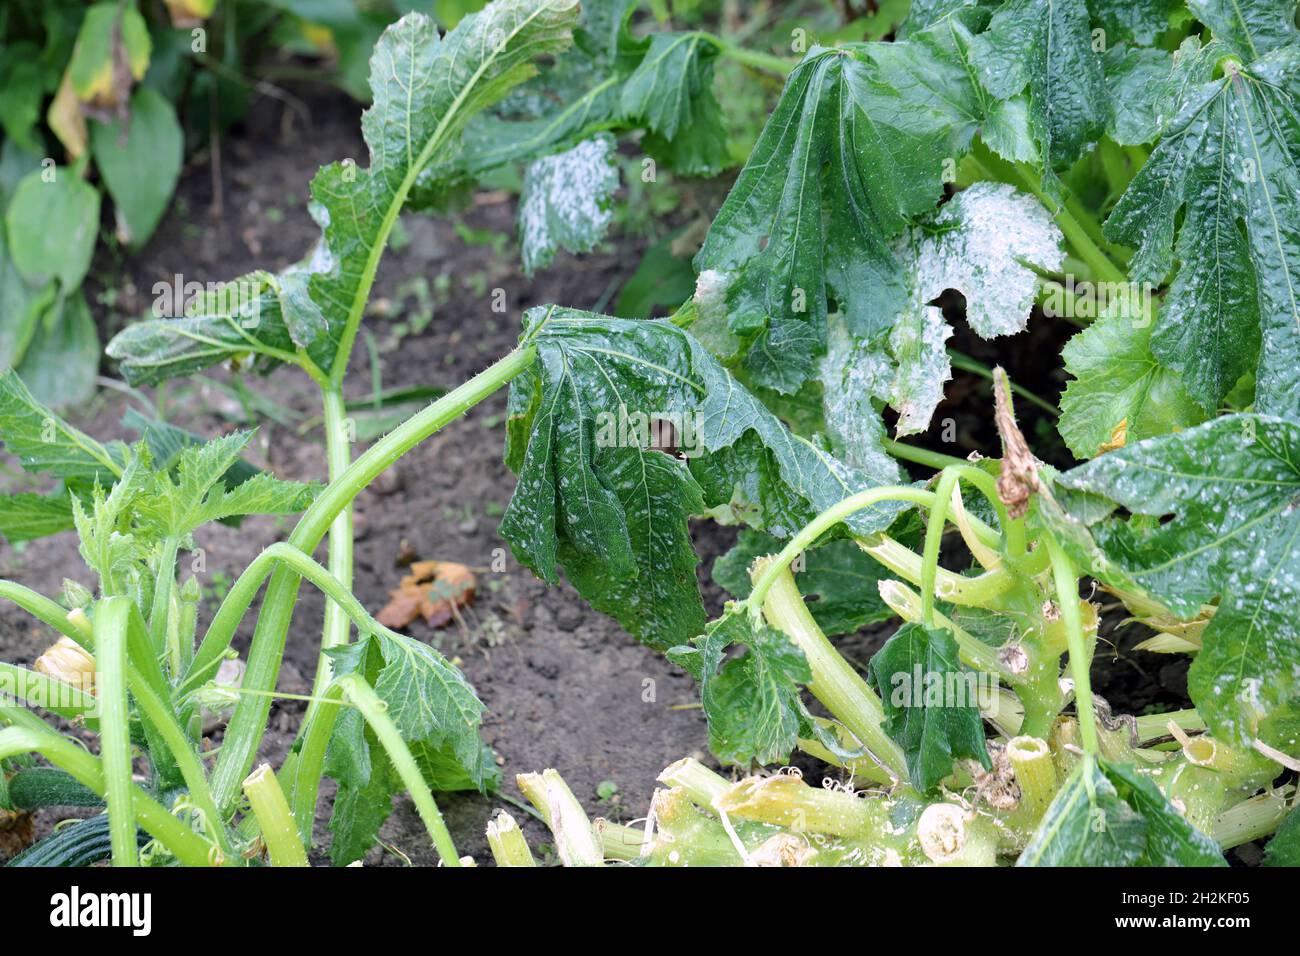 Mold on zucchini leaf, zucchini infected with disease and damaged by frost. Stock Photo